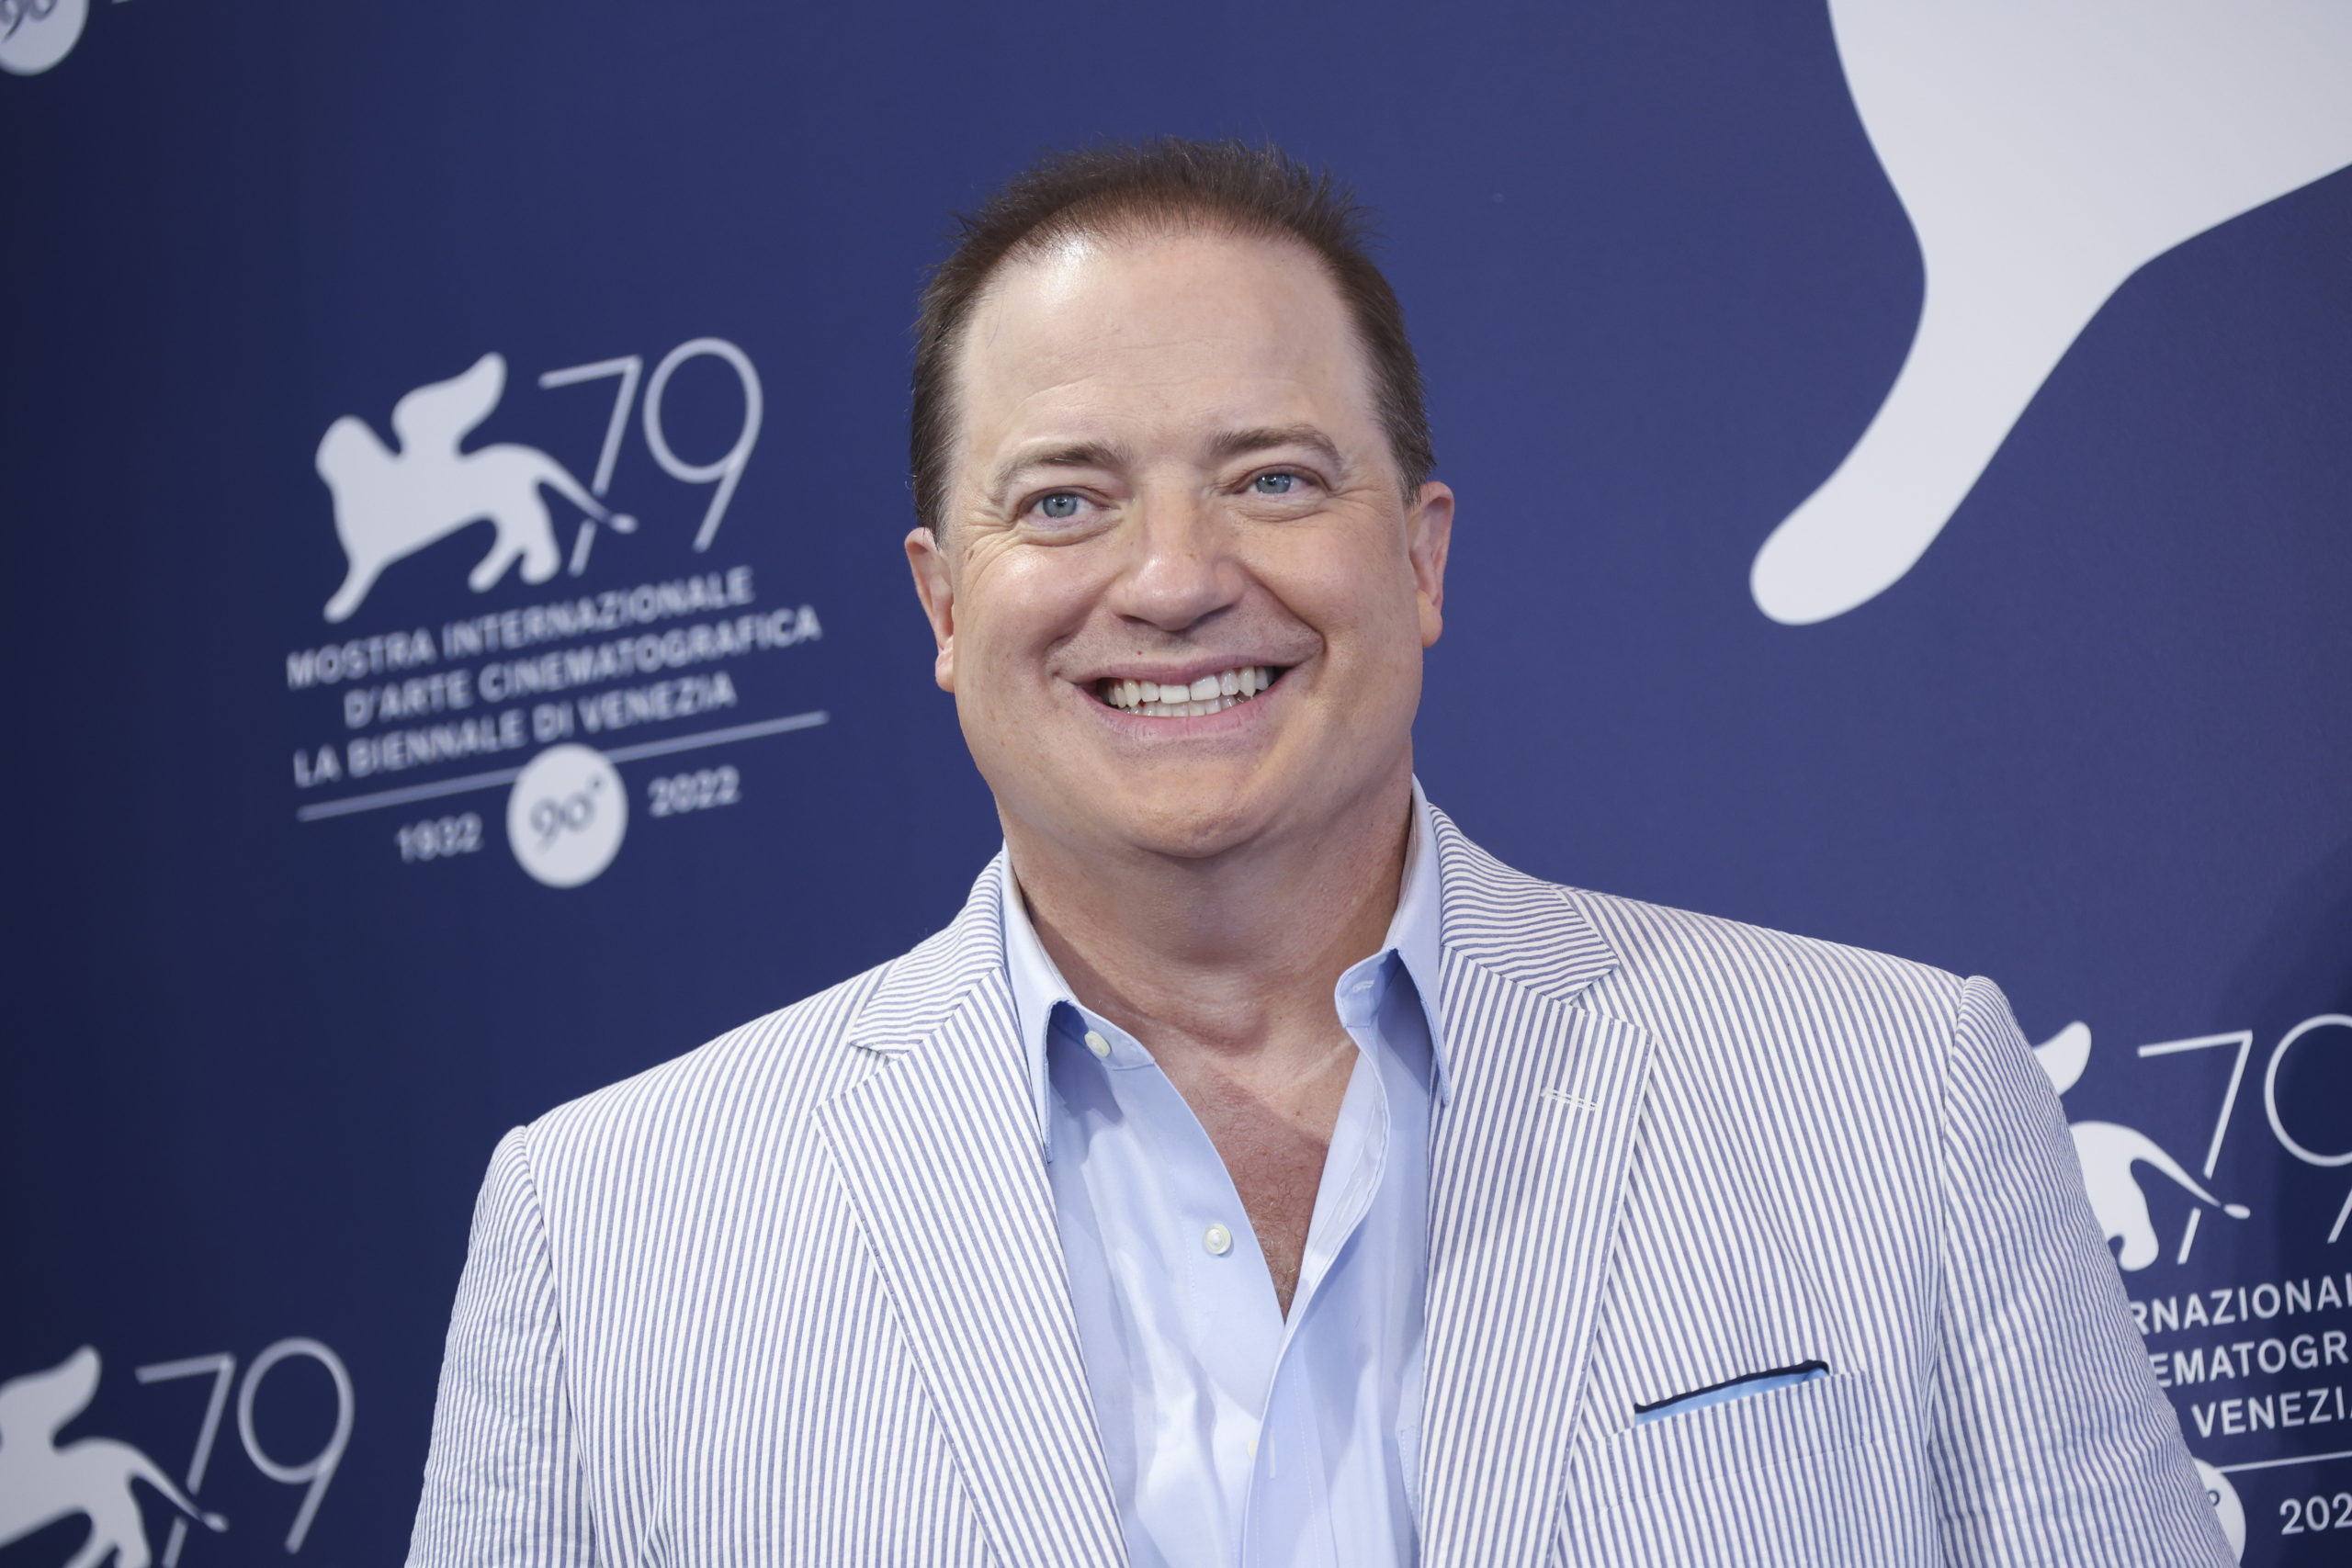 Brendan Fraser takes photos during the photo call for "The Whale," his new film debuting at the 79th edition of the Venice Film Festival in Venice, Italy on Sunday.